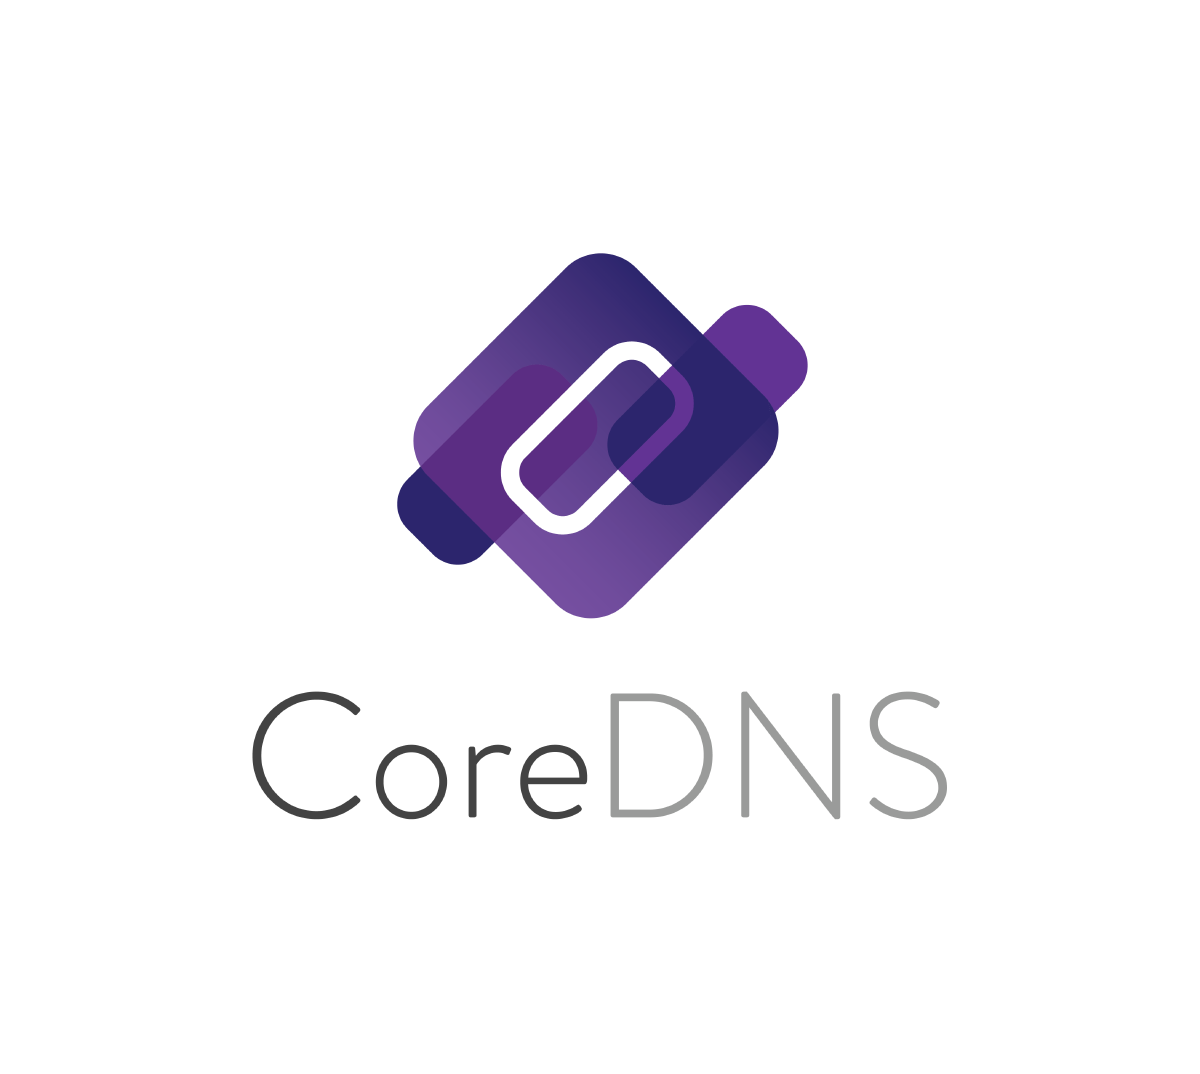 Introducing Automated TLS Certificates in CoreDNS